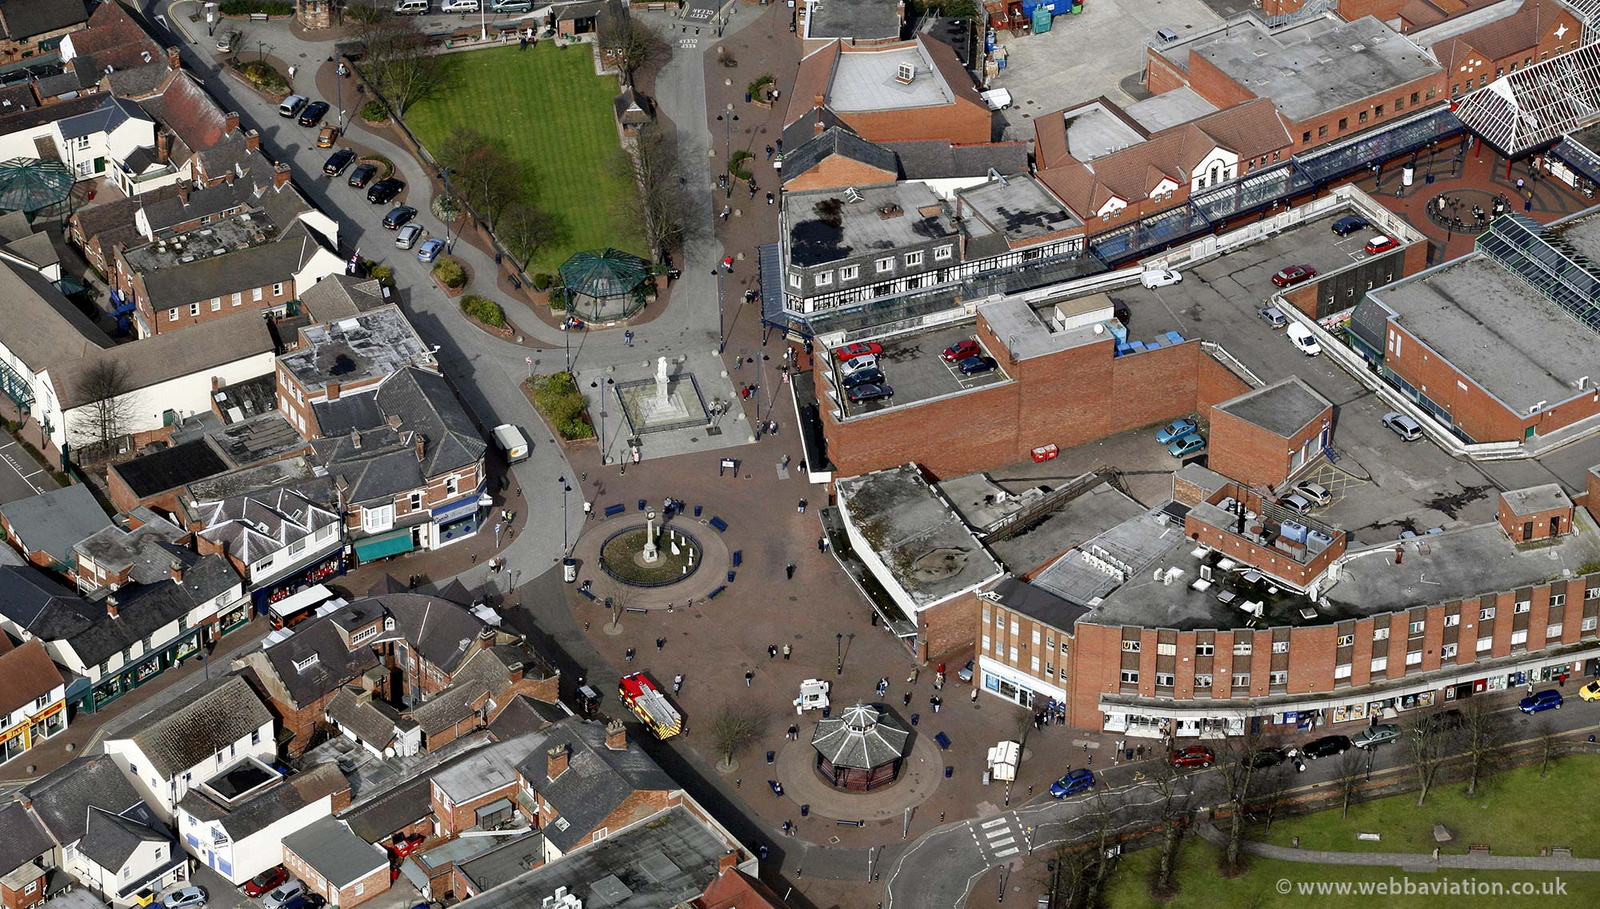 Cannock town centre  Staffordshire  from the air